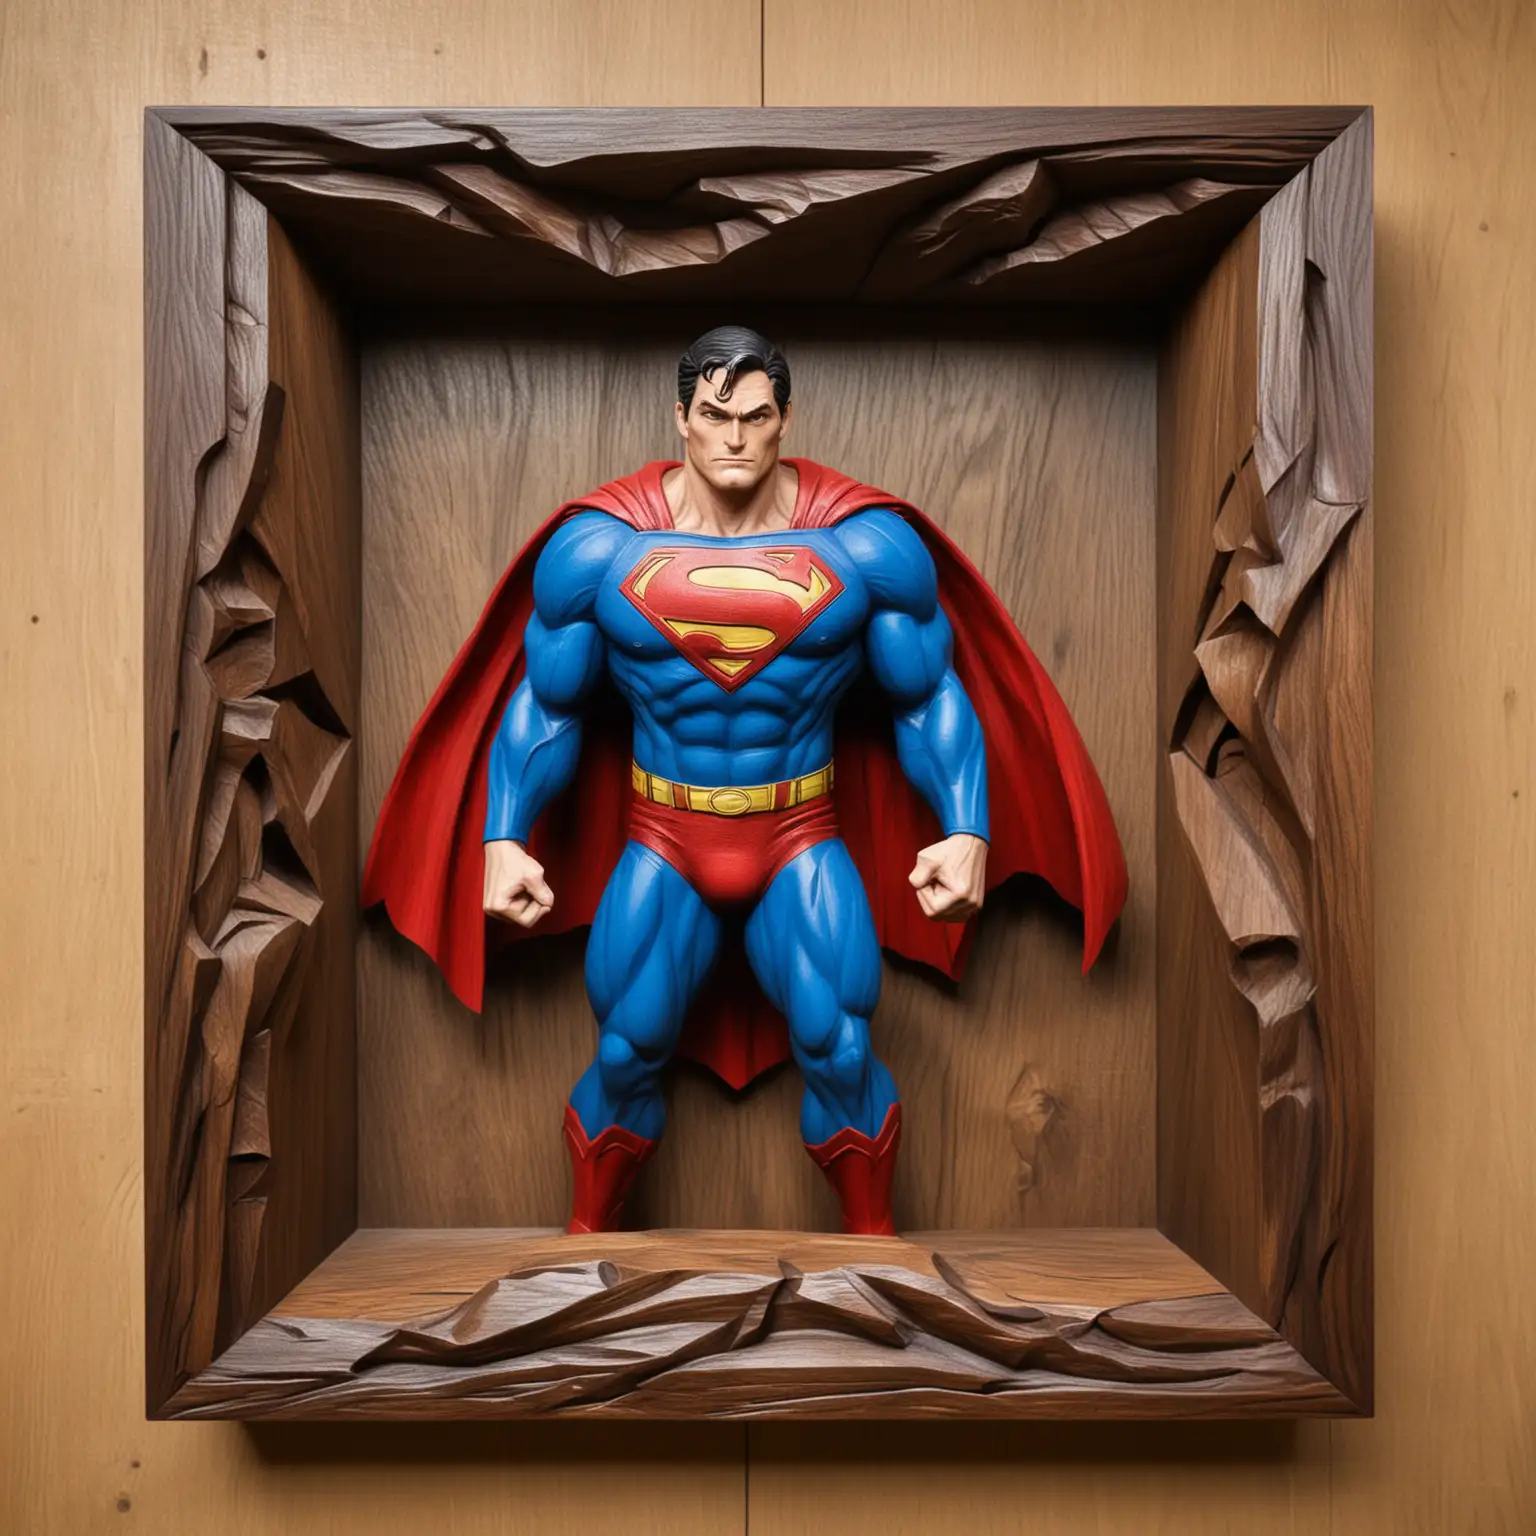 3D dark wood carved  tattooed man of steel-superman standing tunnel  within oak wood surround frame